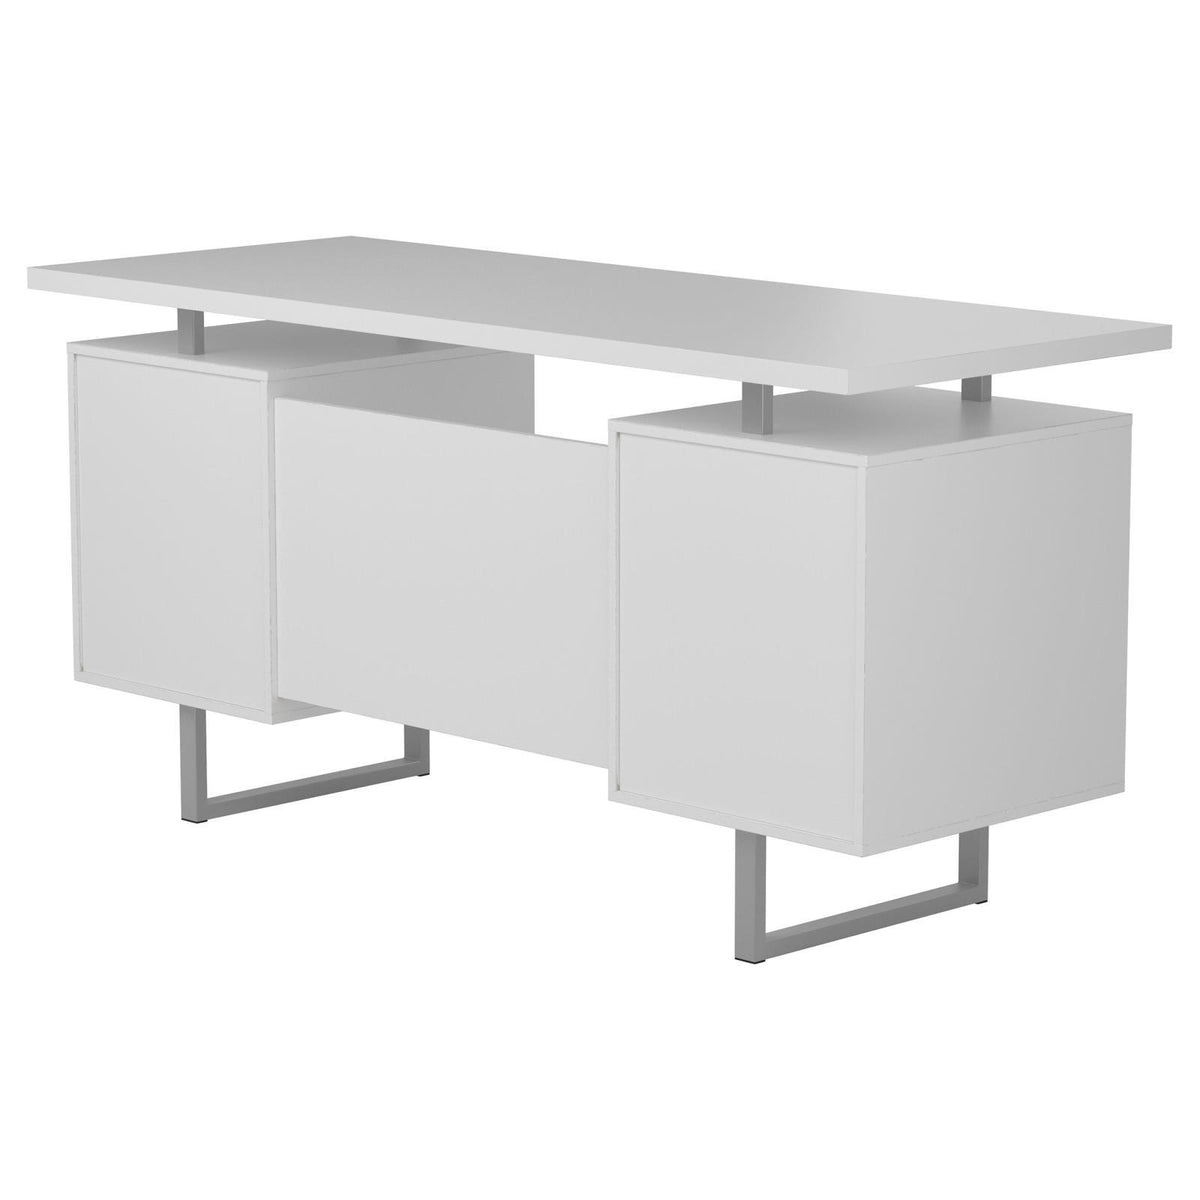 Lawtey Floating Top Office Desk White Gloss Lawtey Floating Top Office Desk White Gloss Half Price Furniture